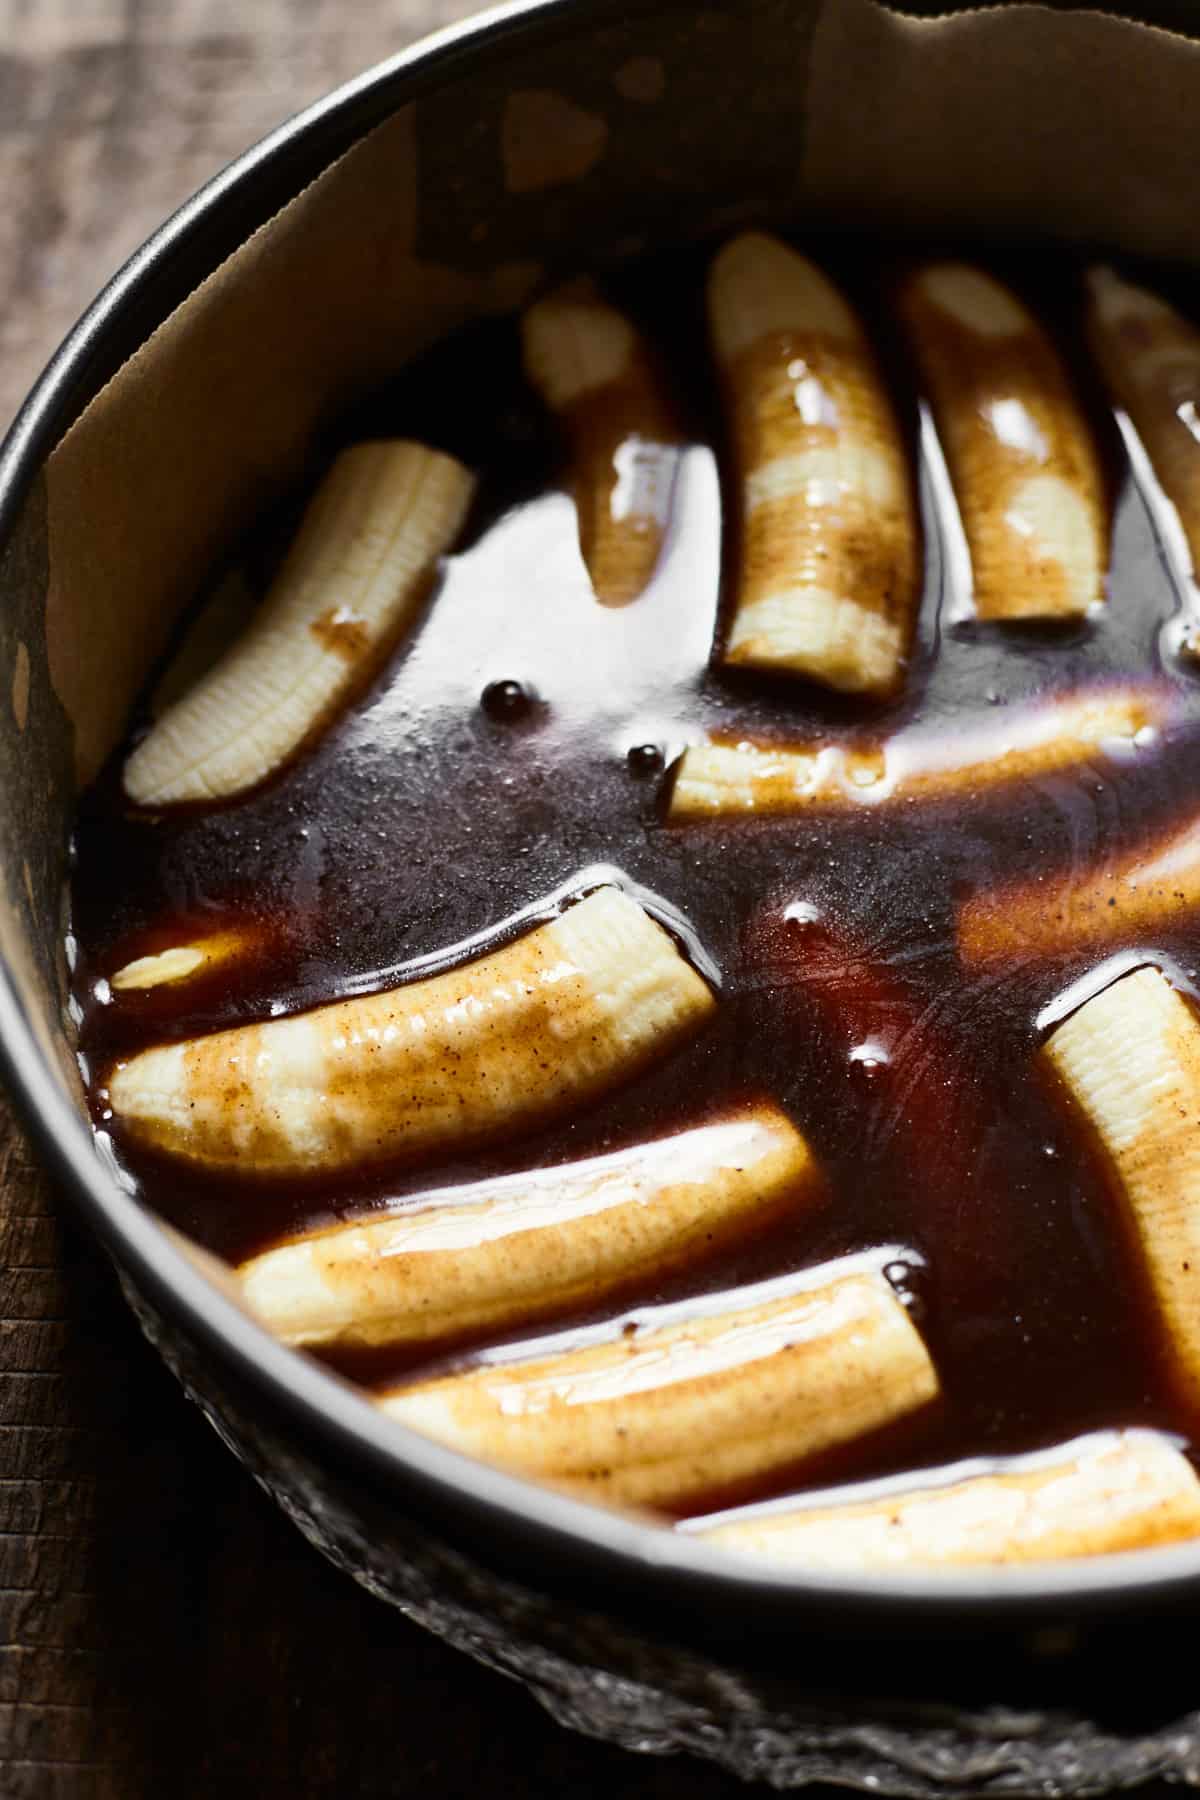 Bananas in a springform pan topped with rum sauce